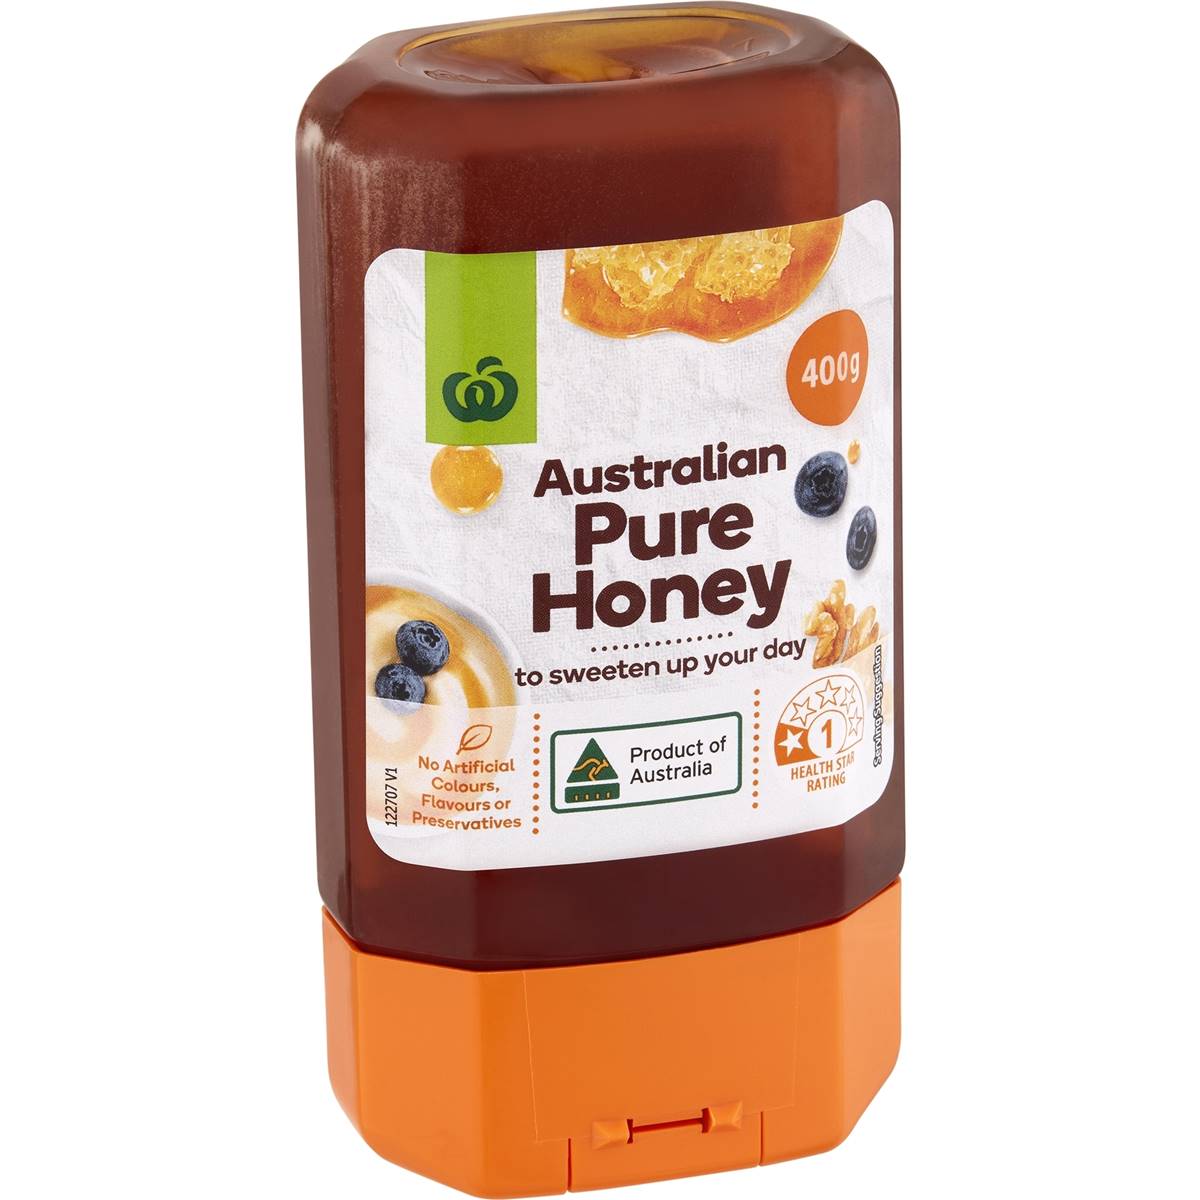 Calories in Woolworths Pure Honey